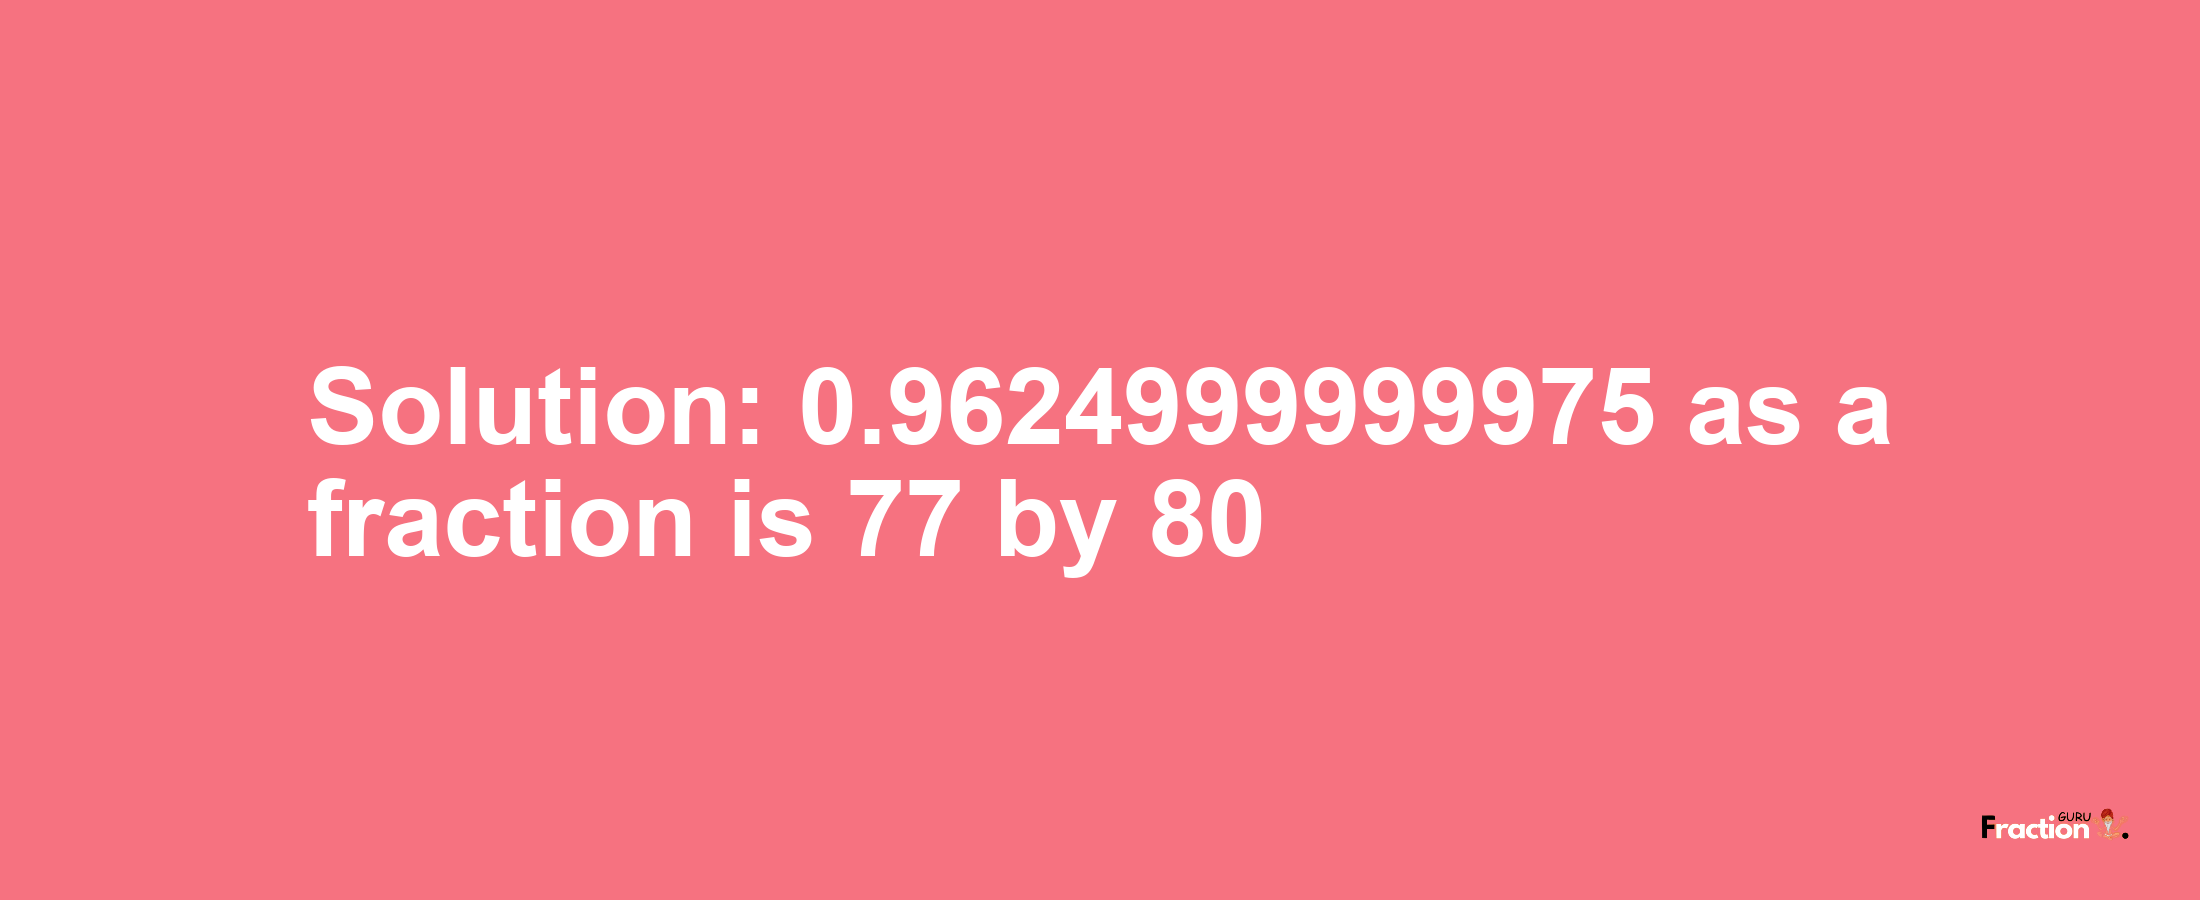 Solution:0.9624999999975 as a fraction is 77/80